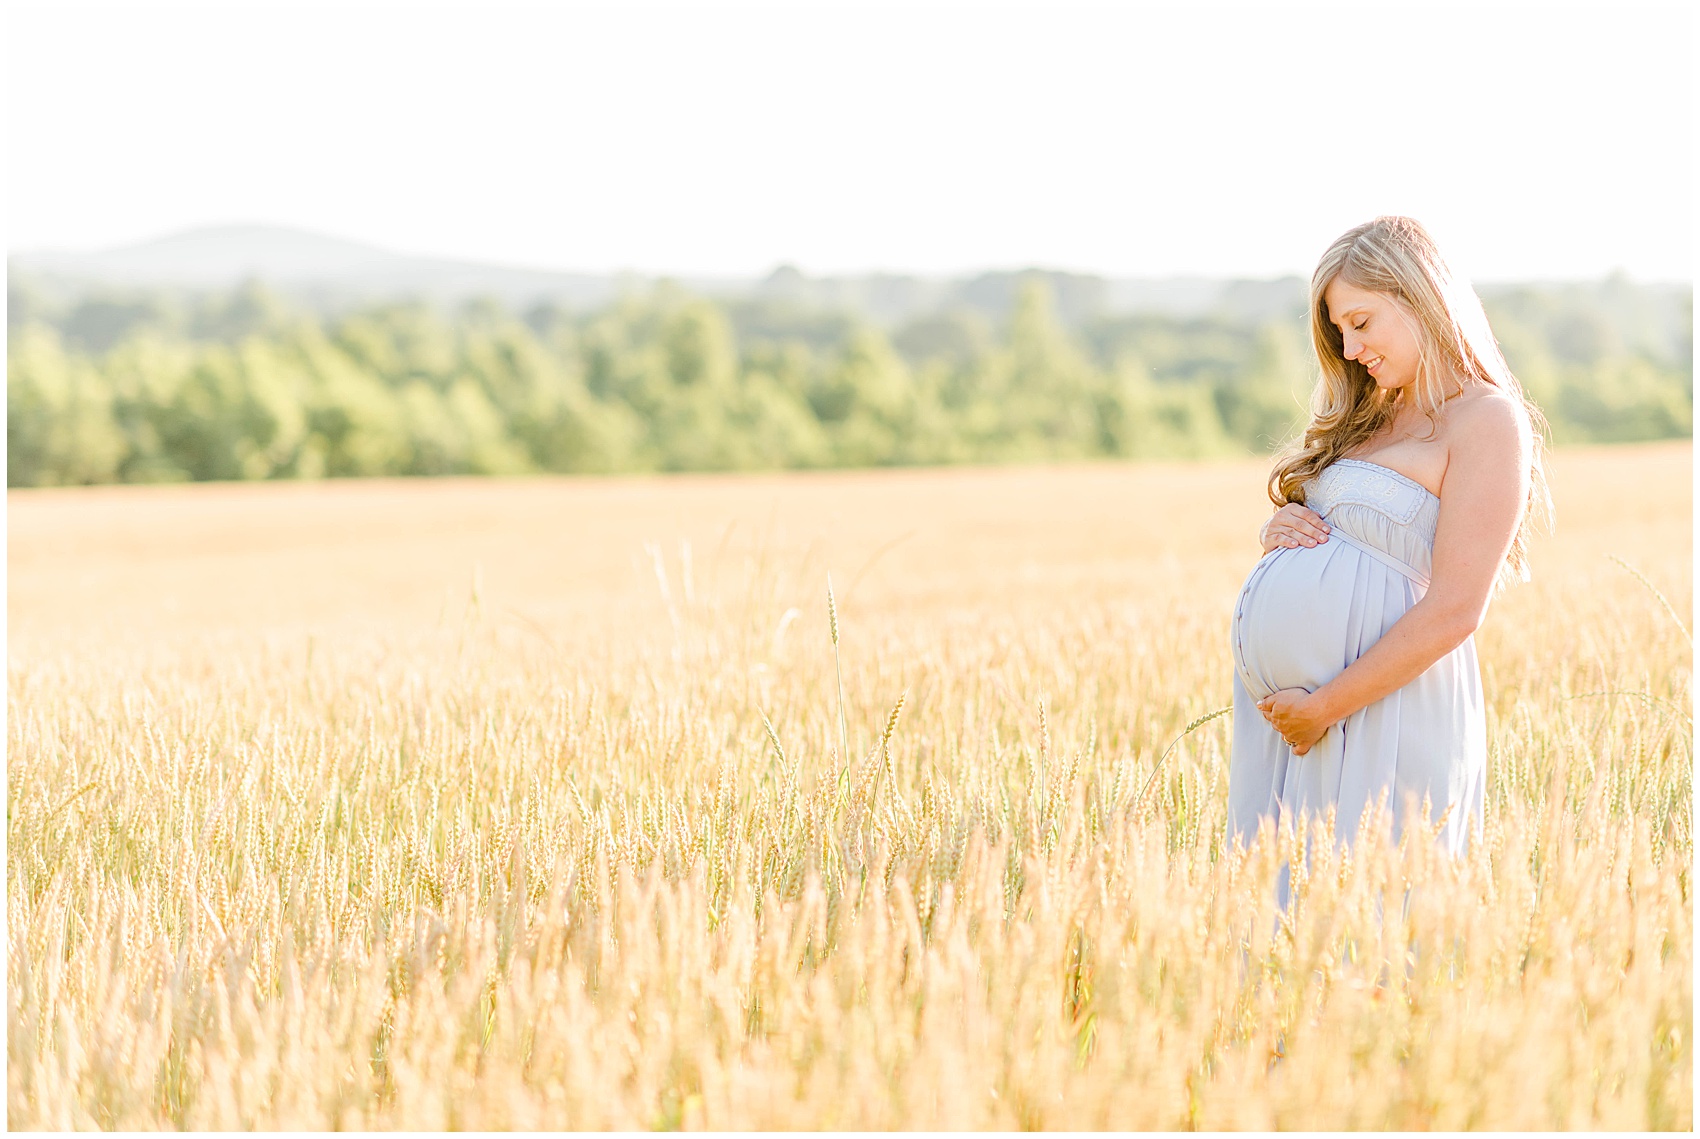 Harvest House and Catering Ramseur NC wheat field maternity session Charleston SC wedding Photographer_0246.jpg